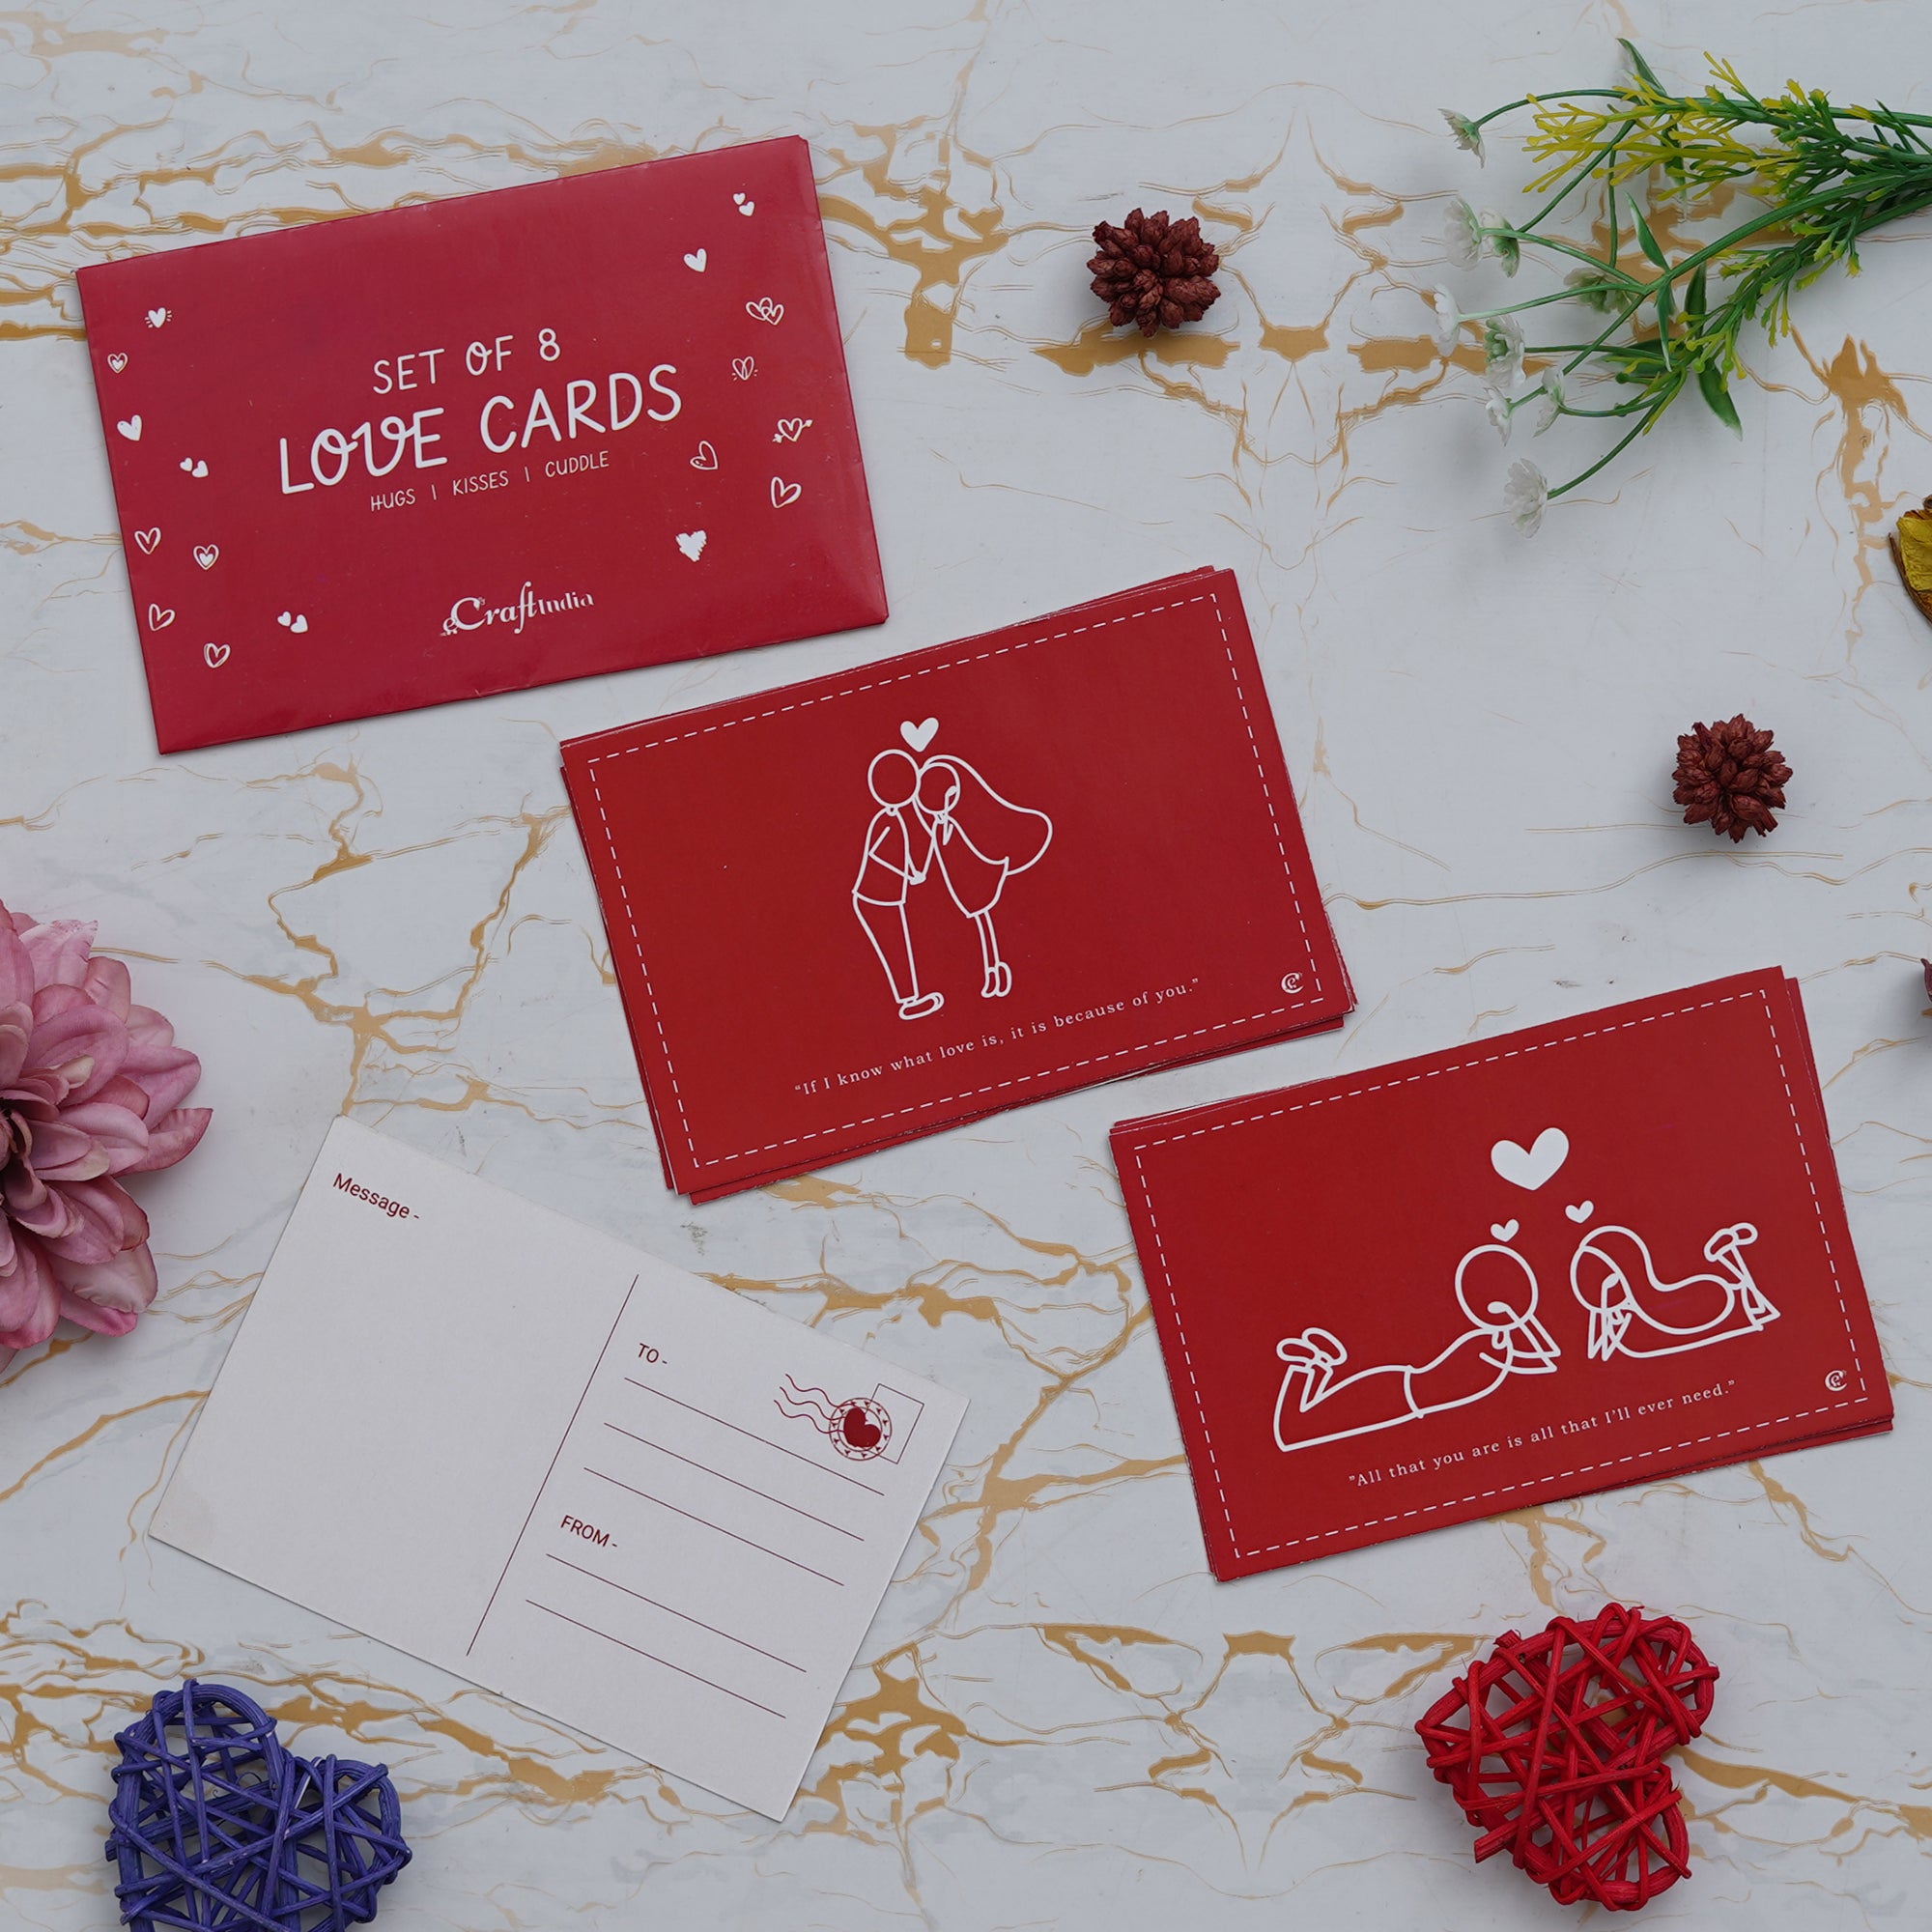 Valentine Combo of Pack of 8 Love Gift Cards, "20 Reasons Why I Love You" Printed on Little Hearts Wooden Gift Set, Red Roses Bouquet and White, Red Teddy Bear Valentine's Rectangle Shaped Gift Box 1